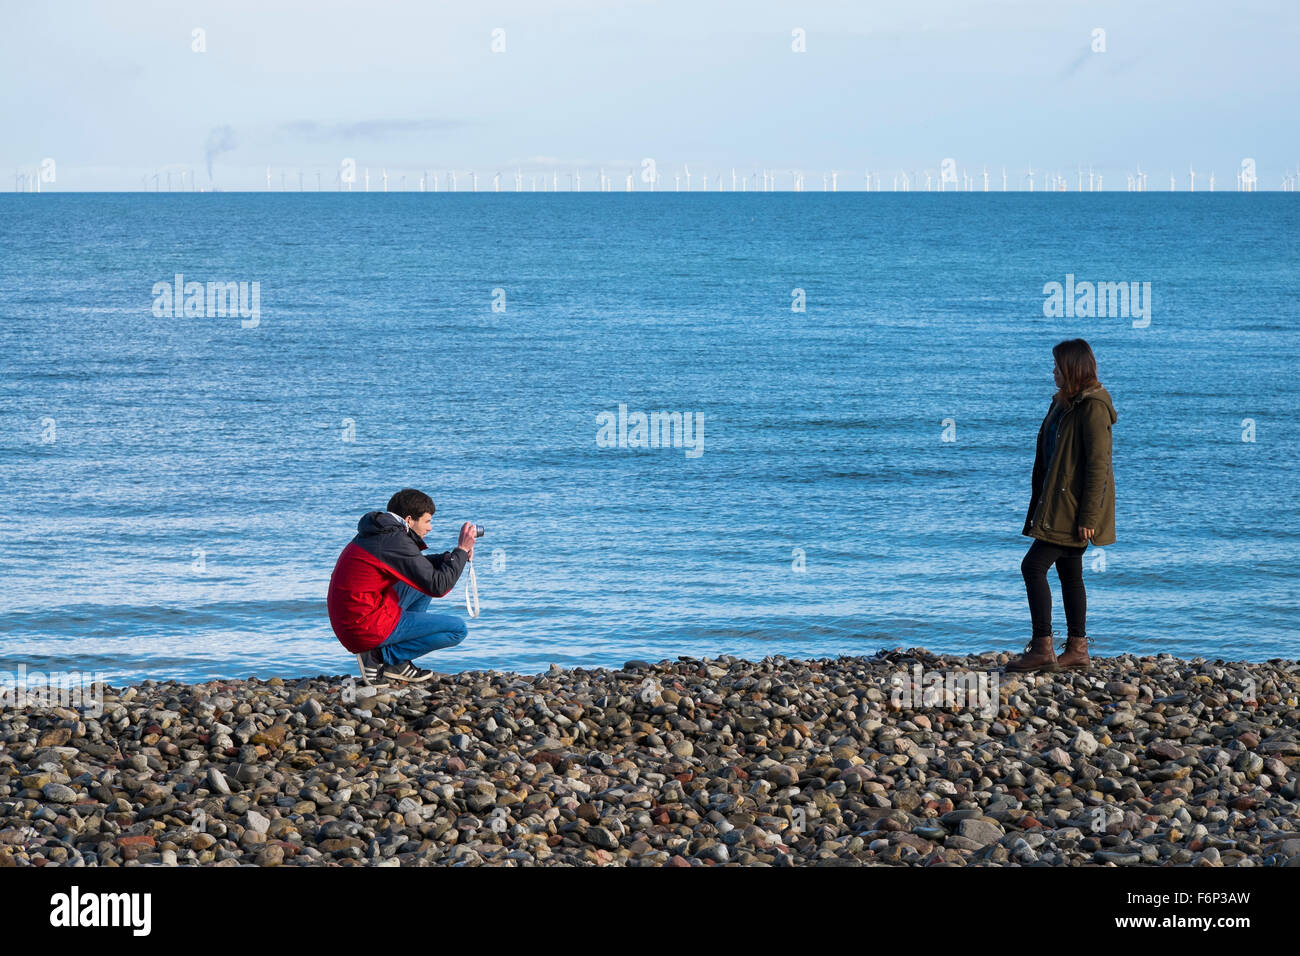 A man taking a picture of a woman on Llandudno beach, Conwy, Wales, UK Stock Photo